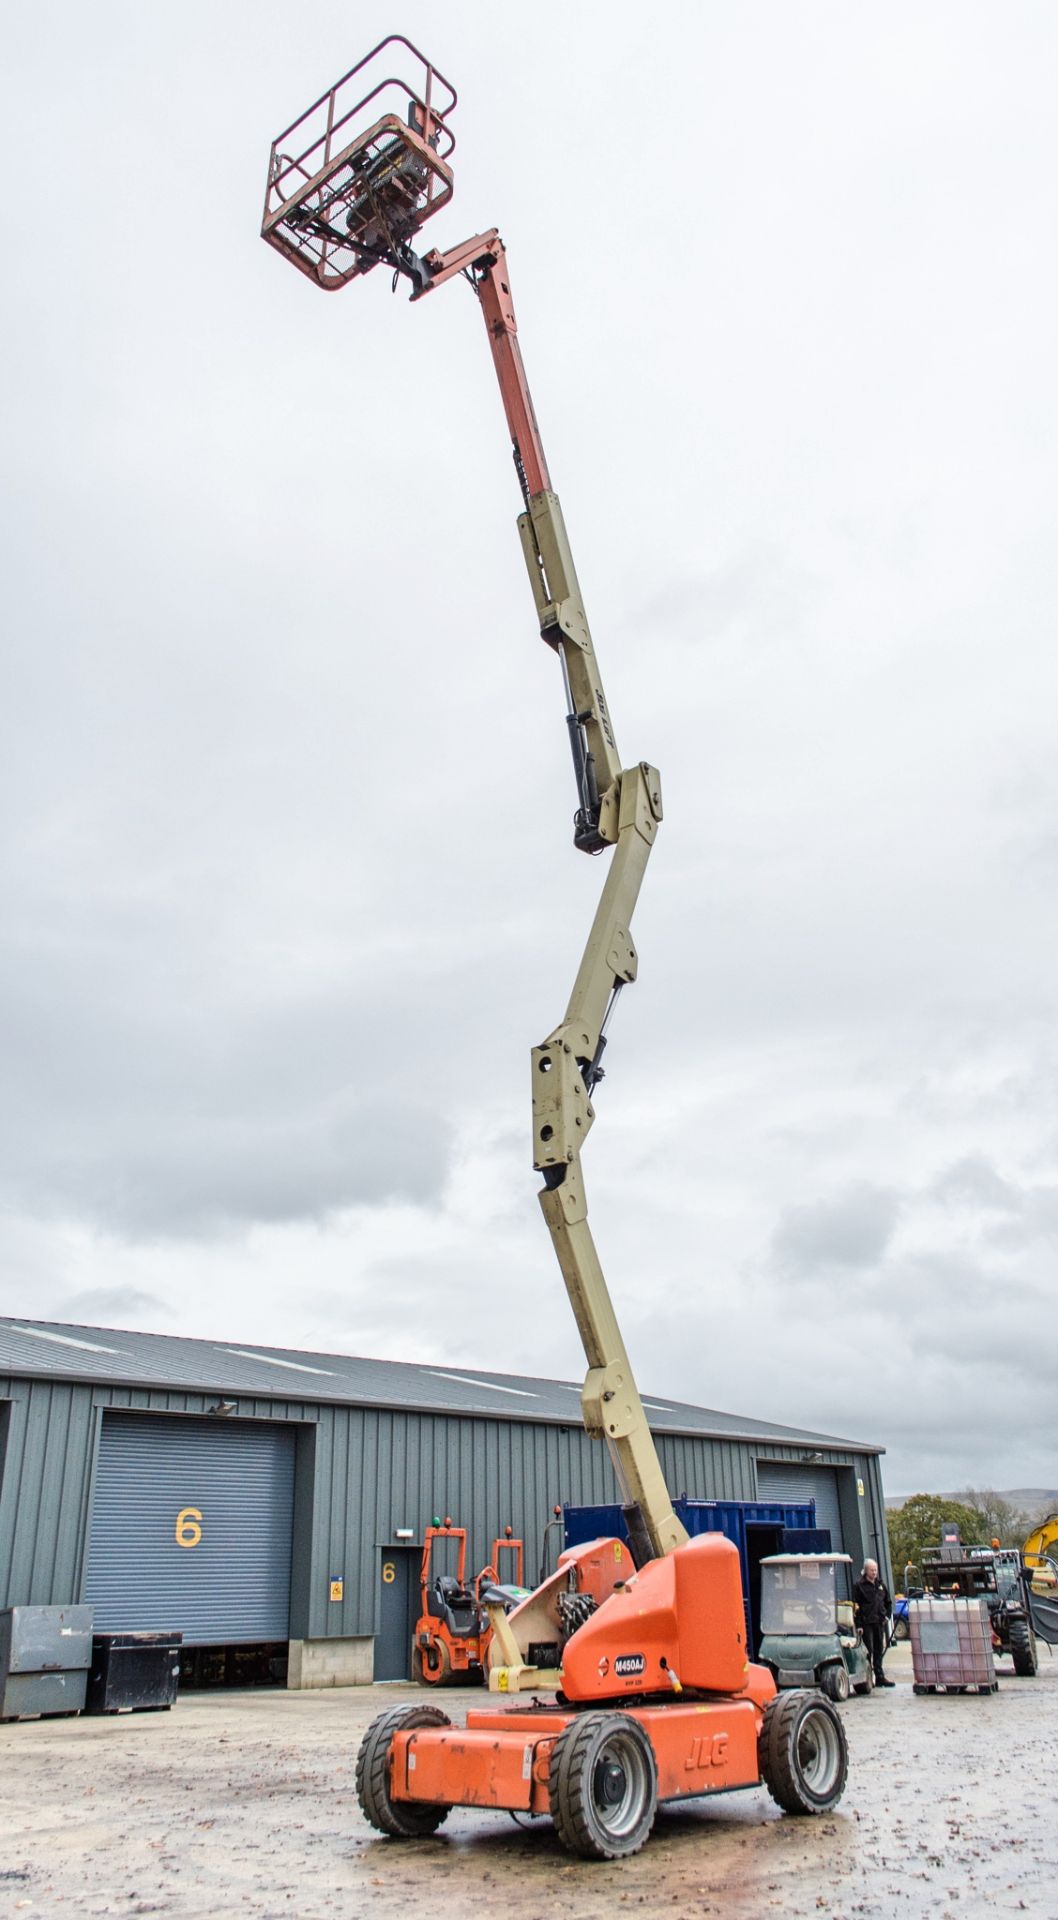 JLG M450AJ hybrid articulated boom lift Year: 2012 S/N: 156095 Recorded hours: 8 (Suspect clock - Image 9 of 17